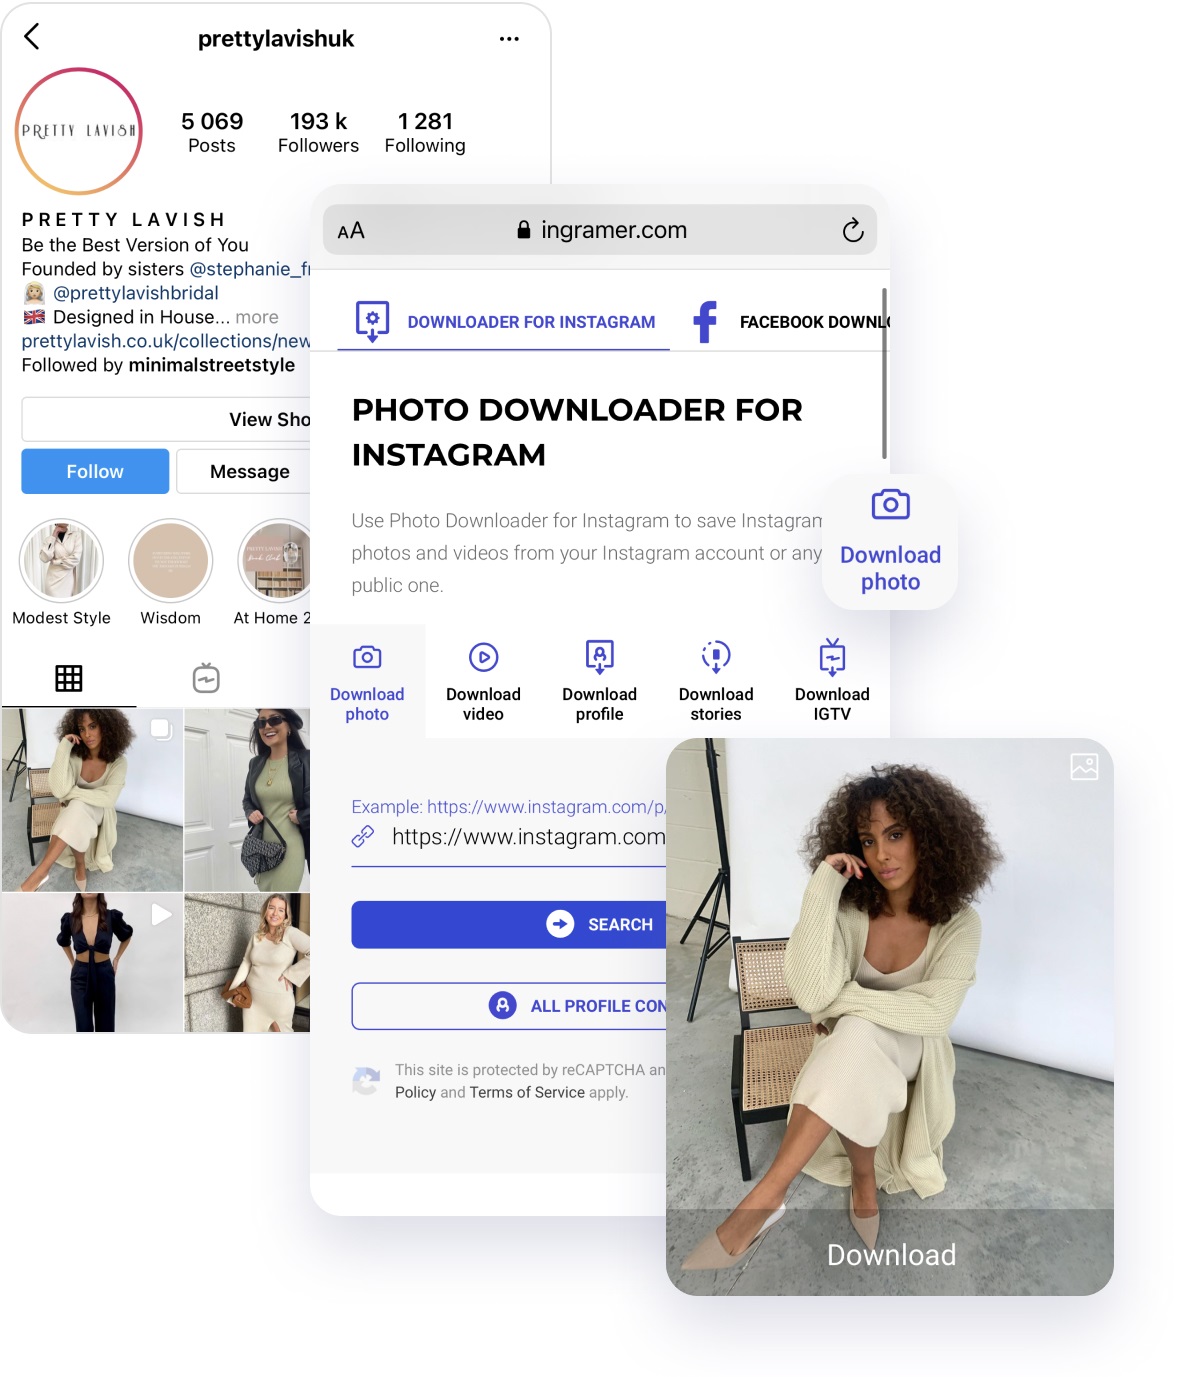 content within the Instagram app